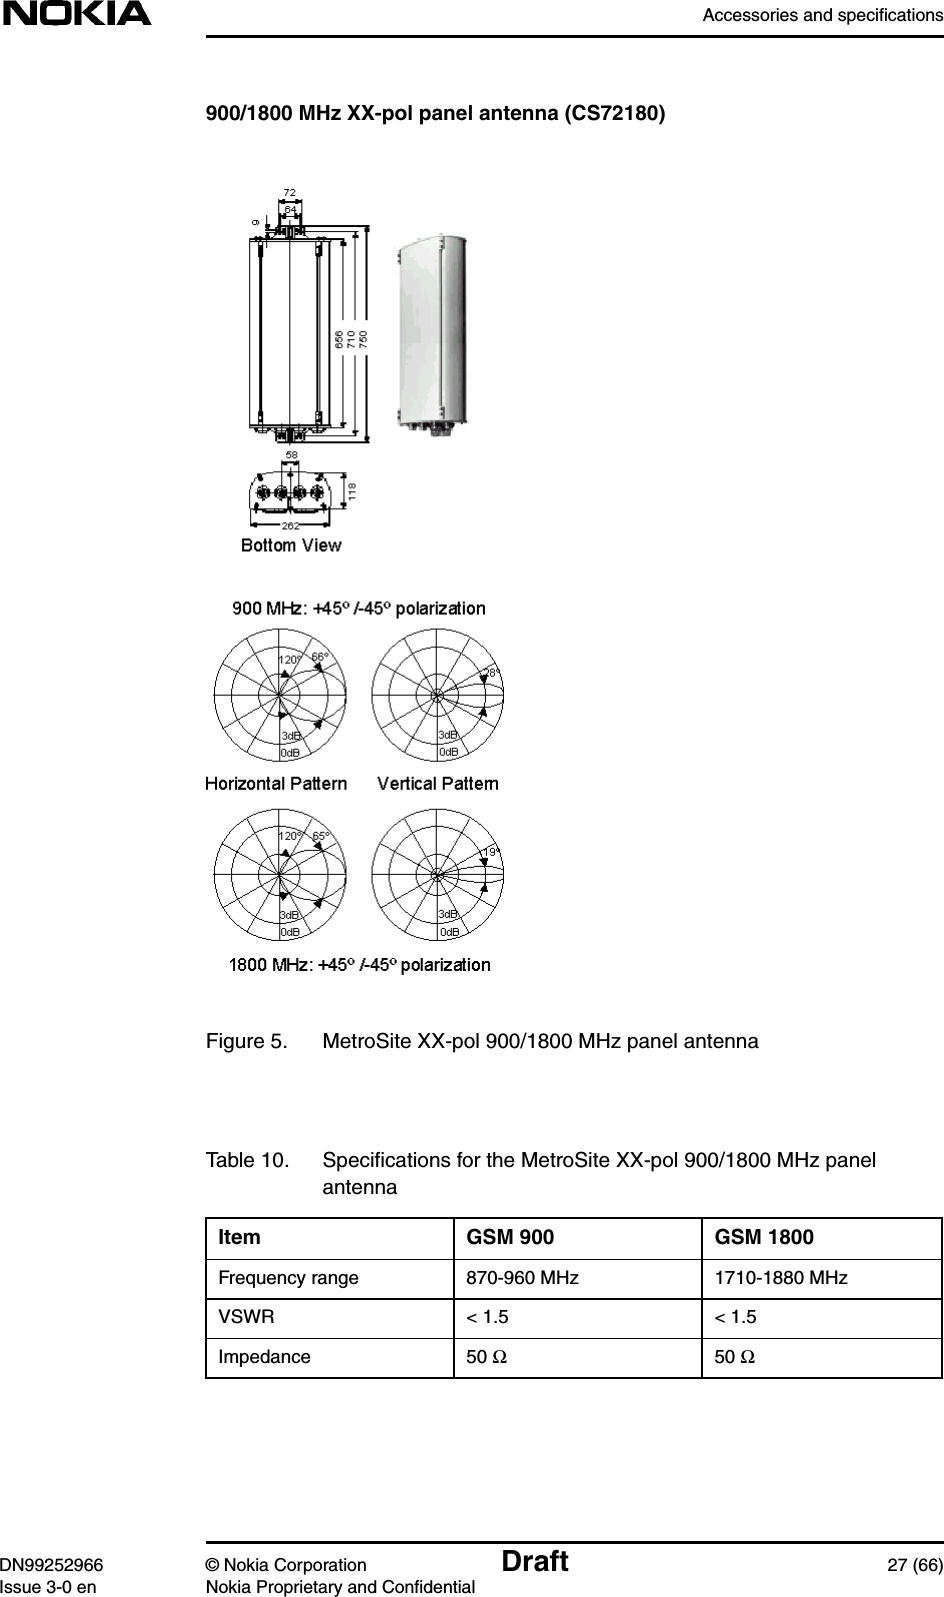 Accessories and specificationsDN99252966 © Nokia Corporation Draft 27 (66)Issue 3-0 en Nokia Proprietary and Confidential900/1800 MHz XX-pol panel antenna (CS72180)Figure 5. MetroSite XX-pol 900/1800 MHz panel antennaTable 10. Speciﬁcations for the MetroSite XX-pol 900/1800 MHz panelantennaItem GSM 900 GSM 1800Frequency range 870-960 MHz 1710-1880 MHzVSWR &lt; 1.5 &lt; 1.5Impedance 50 Ω50 Ω